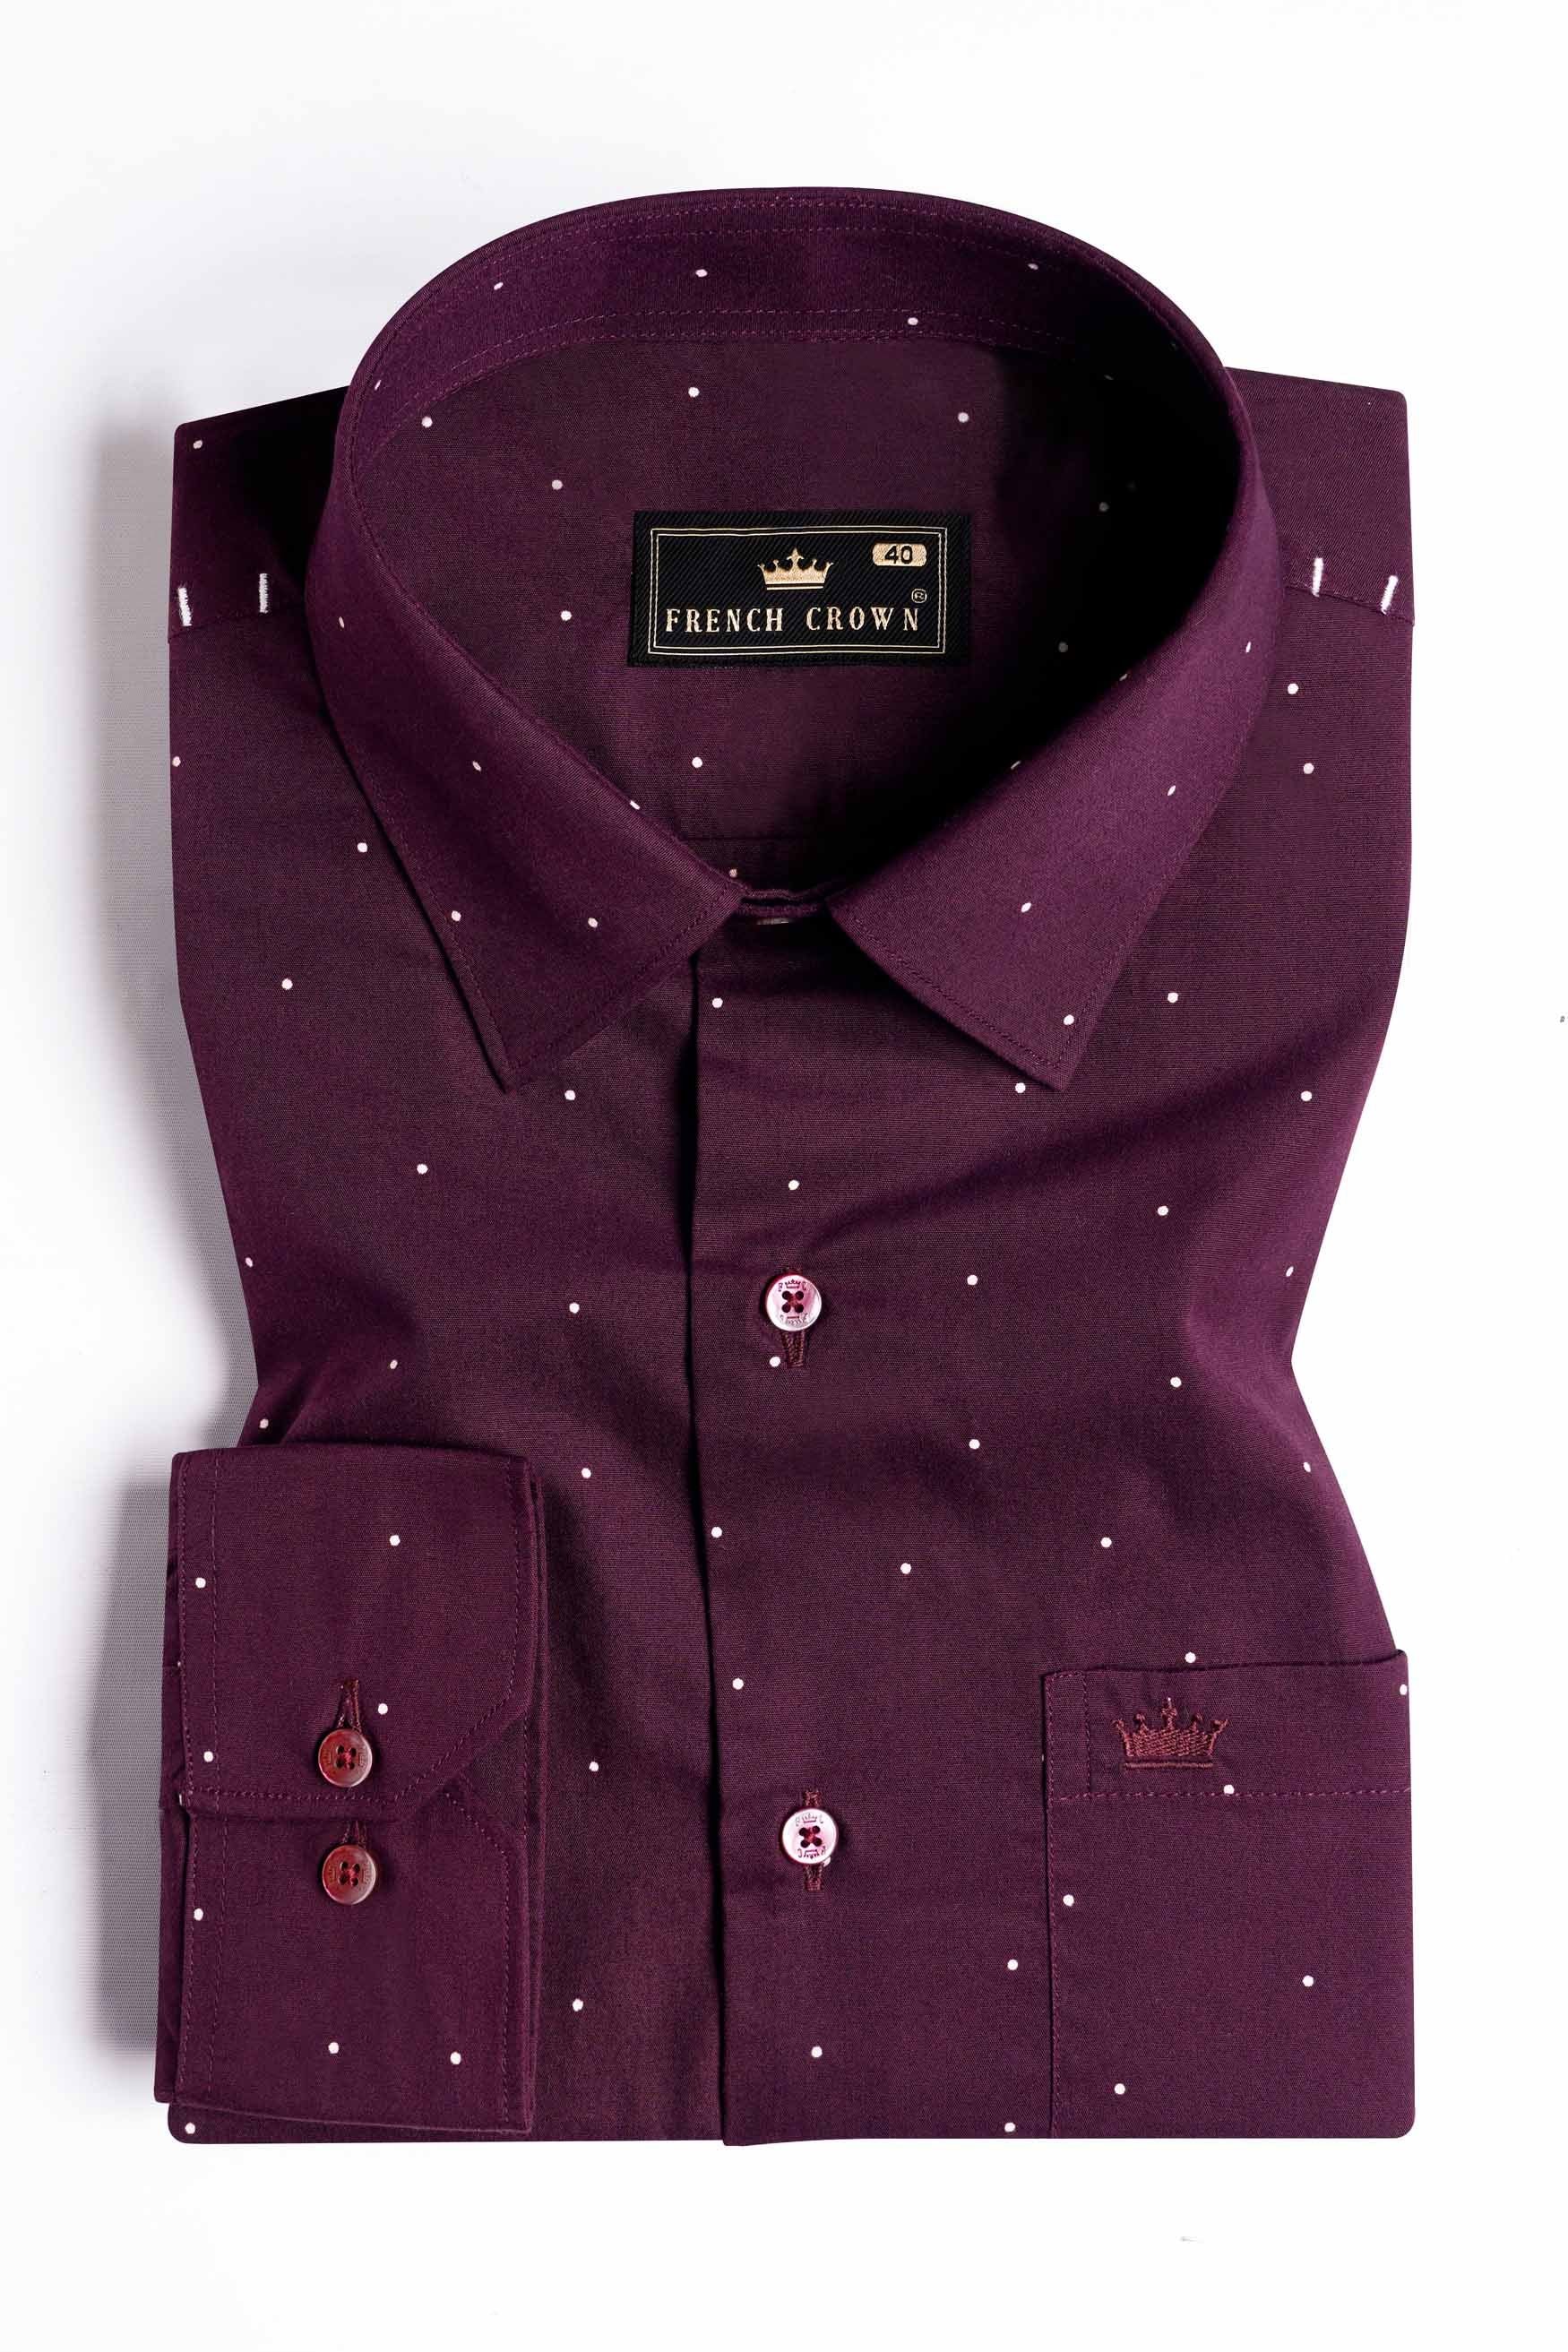 Eggplant Wine with White Dotted Twill Premium Cotton Shirt